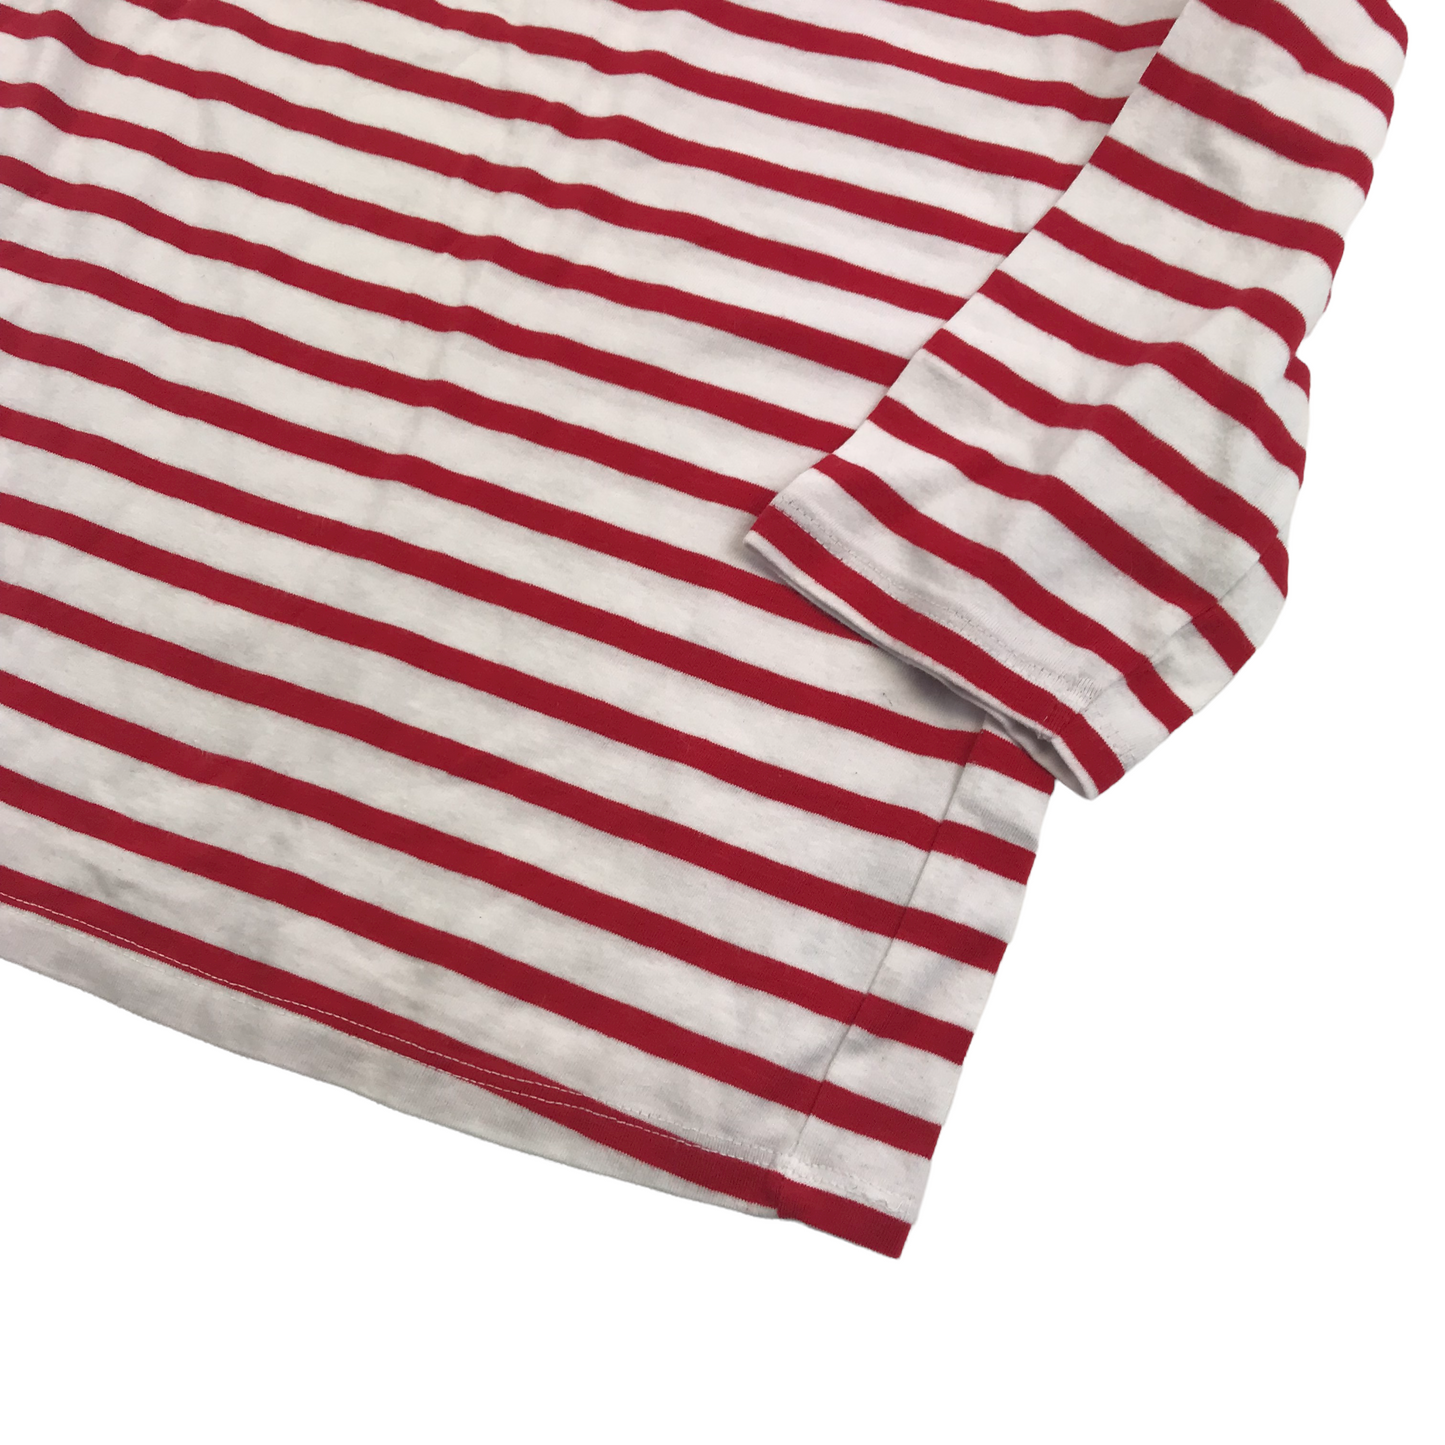 New Look Red and White Stripy Organic Cotton T-shirt Women's Size 6